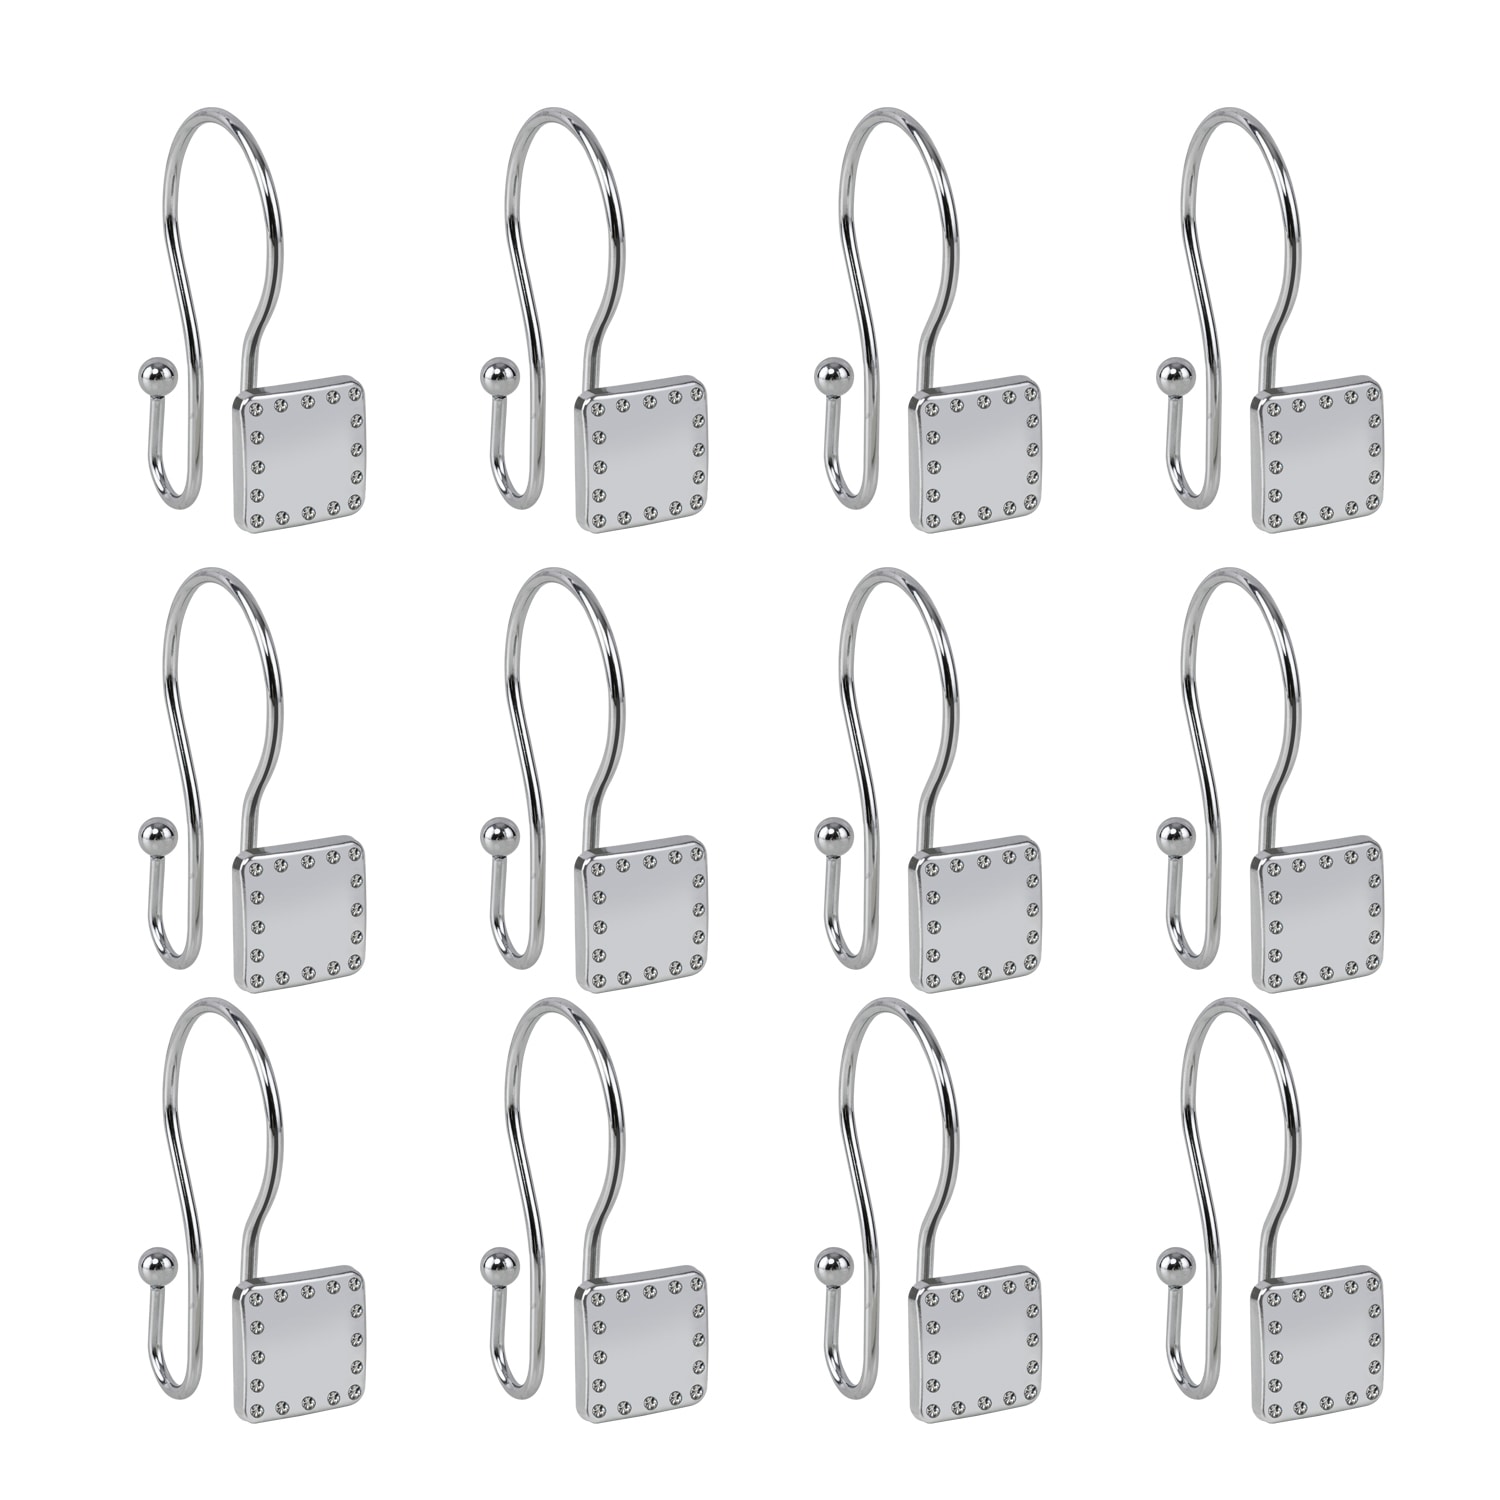 Utopia Alley HK20SS Rust Resistant Double Shower Curtain Hooks for Bathroom, Chrome - Set of 12